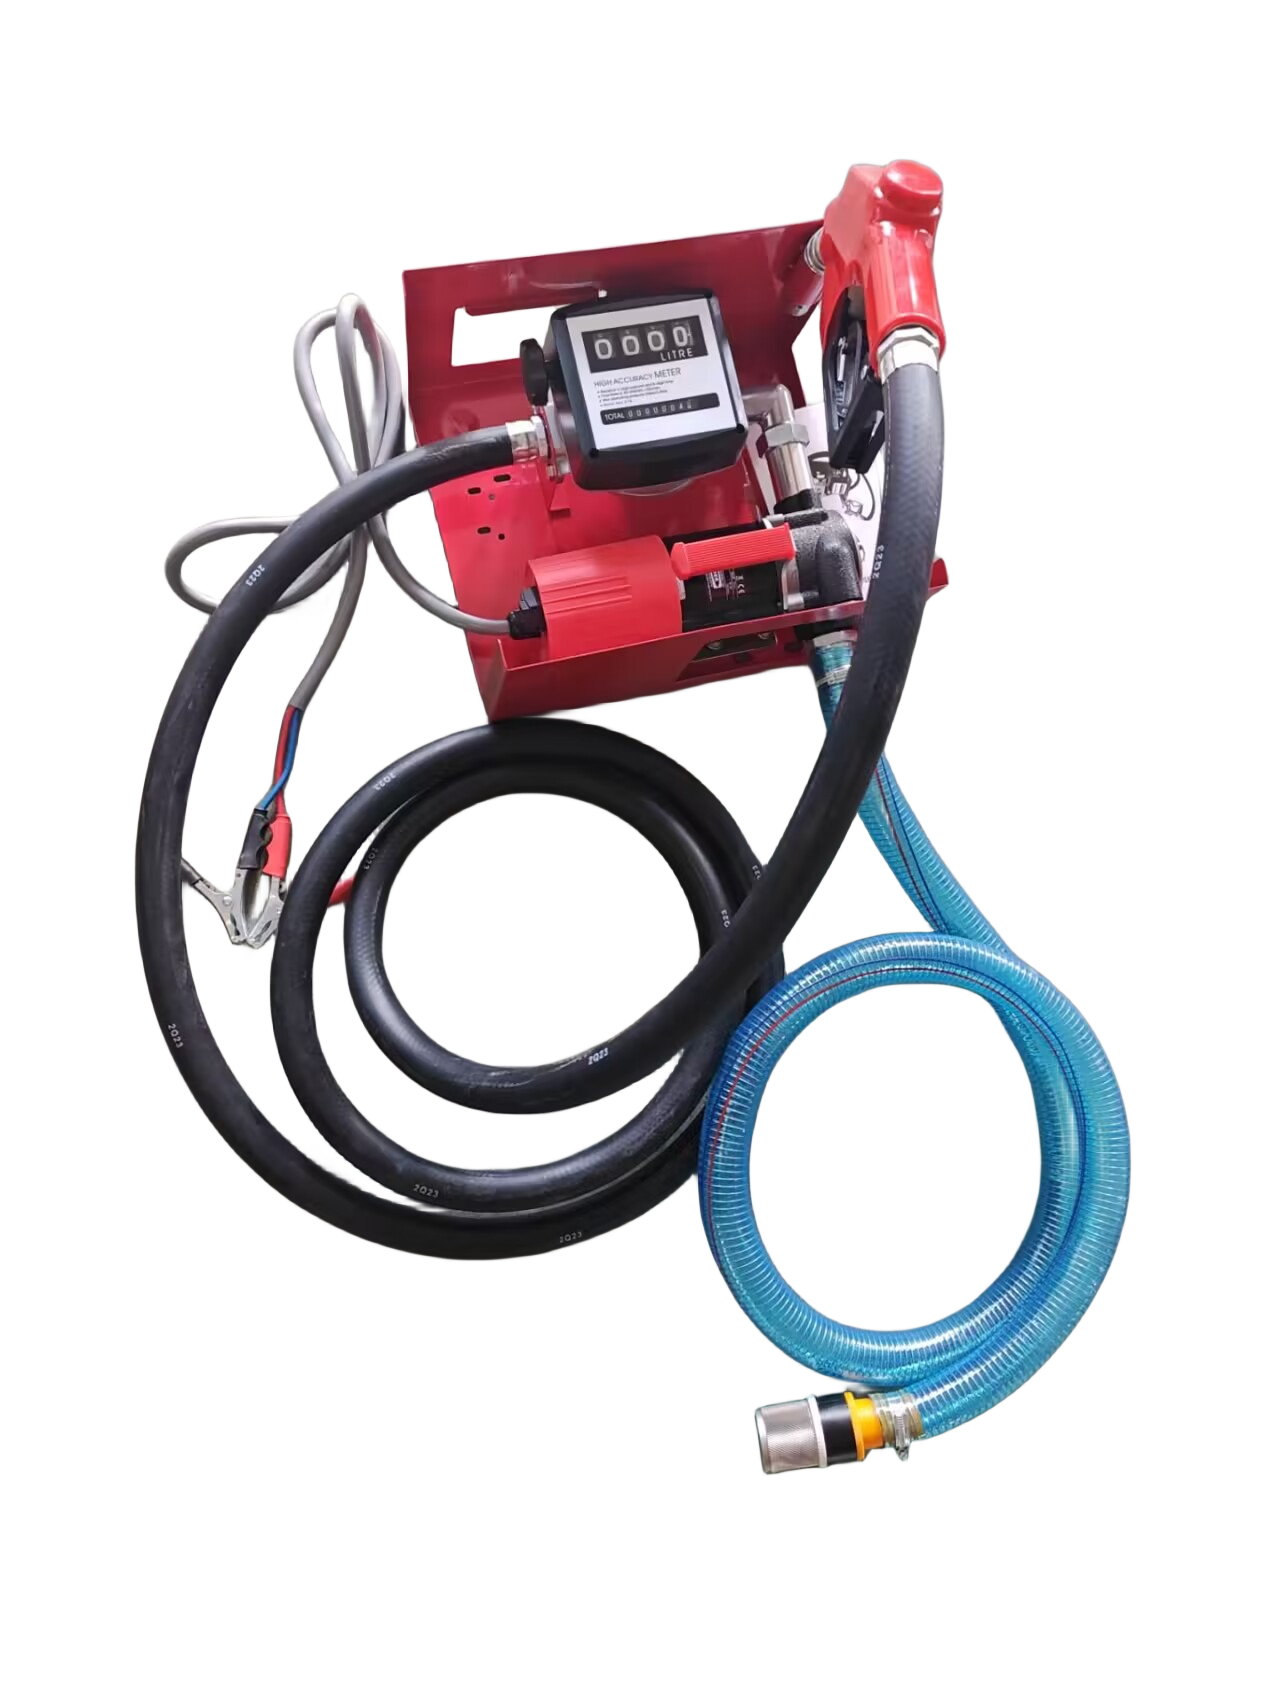 DCFD80 Diesel Fuel Transfer Pump Kit with Nozzle and Hose - Manufacturer of  fuel DISPENSERS, HOSE REELS, and PUMPS for Industrial Maintenance and  Agriculture.